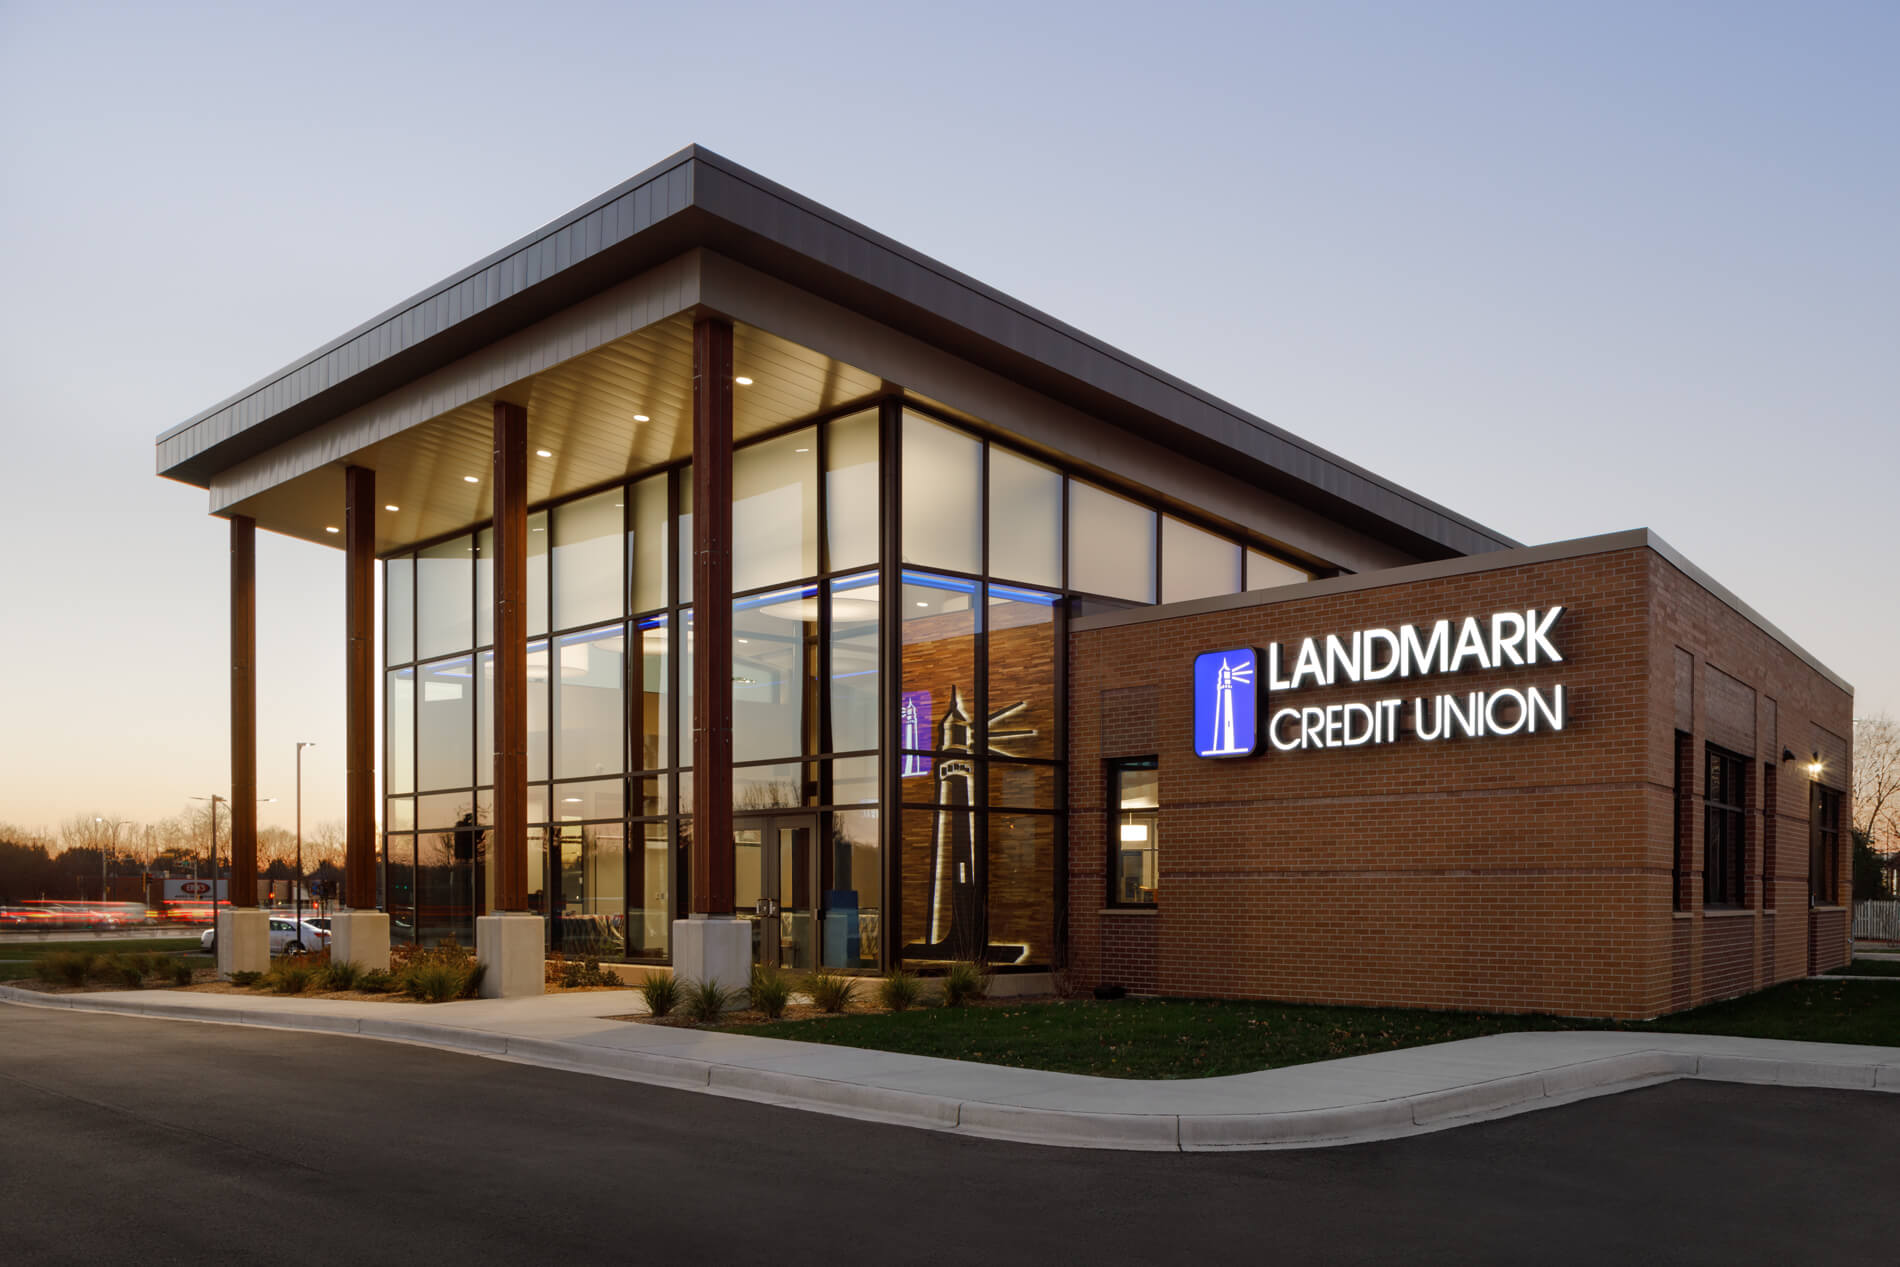 New branch for Landmark Credit Union located in Greenfield